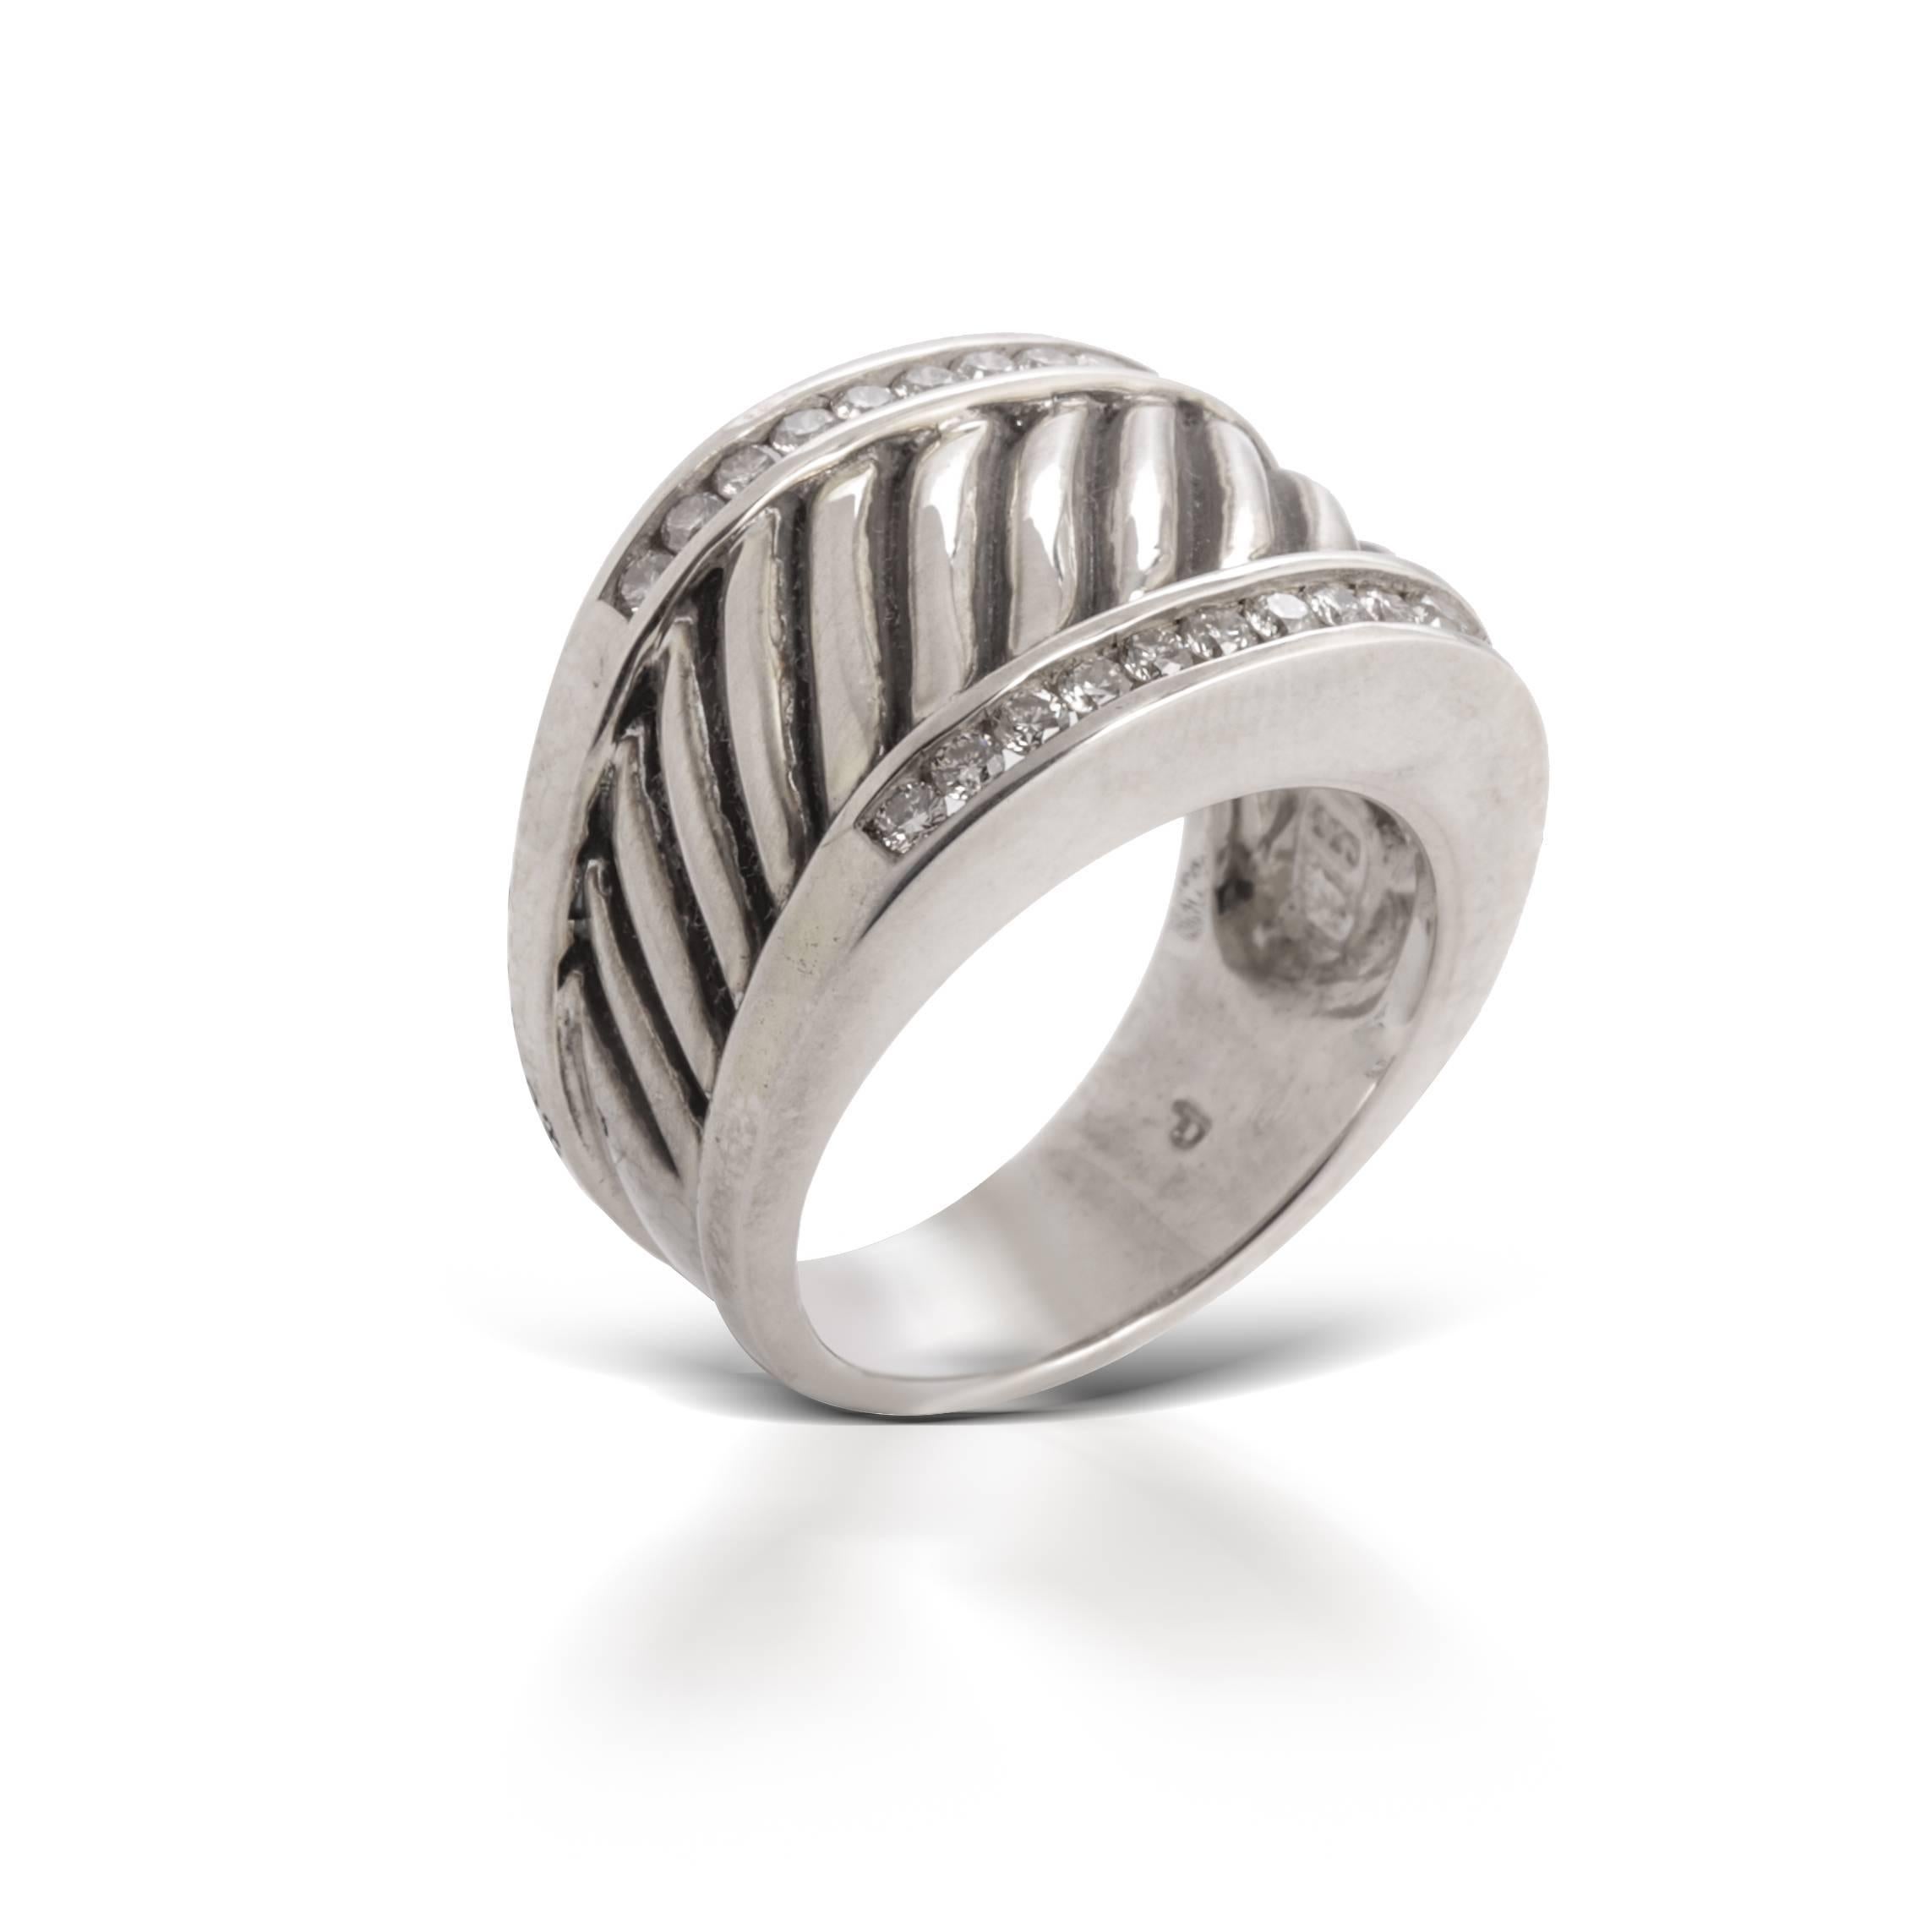 Previously loved sterling silver David Yurman Silver Ice Thoroughbred Cigar band ring featuring 0.48 carat of round brilliant diamonds (size 7.5).